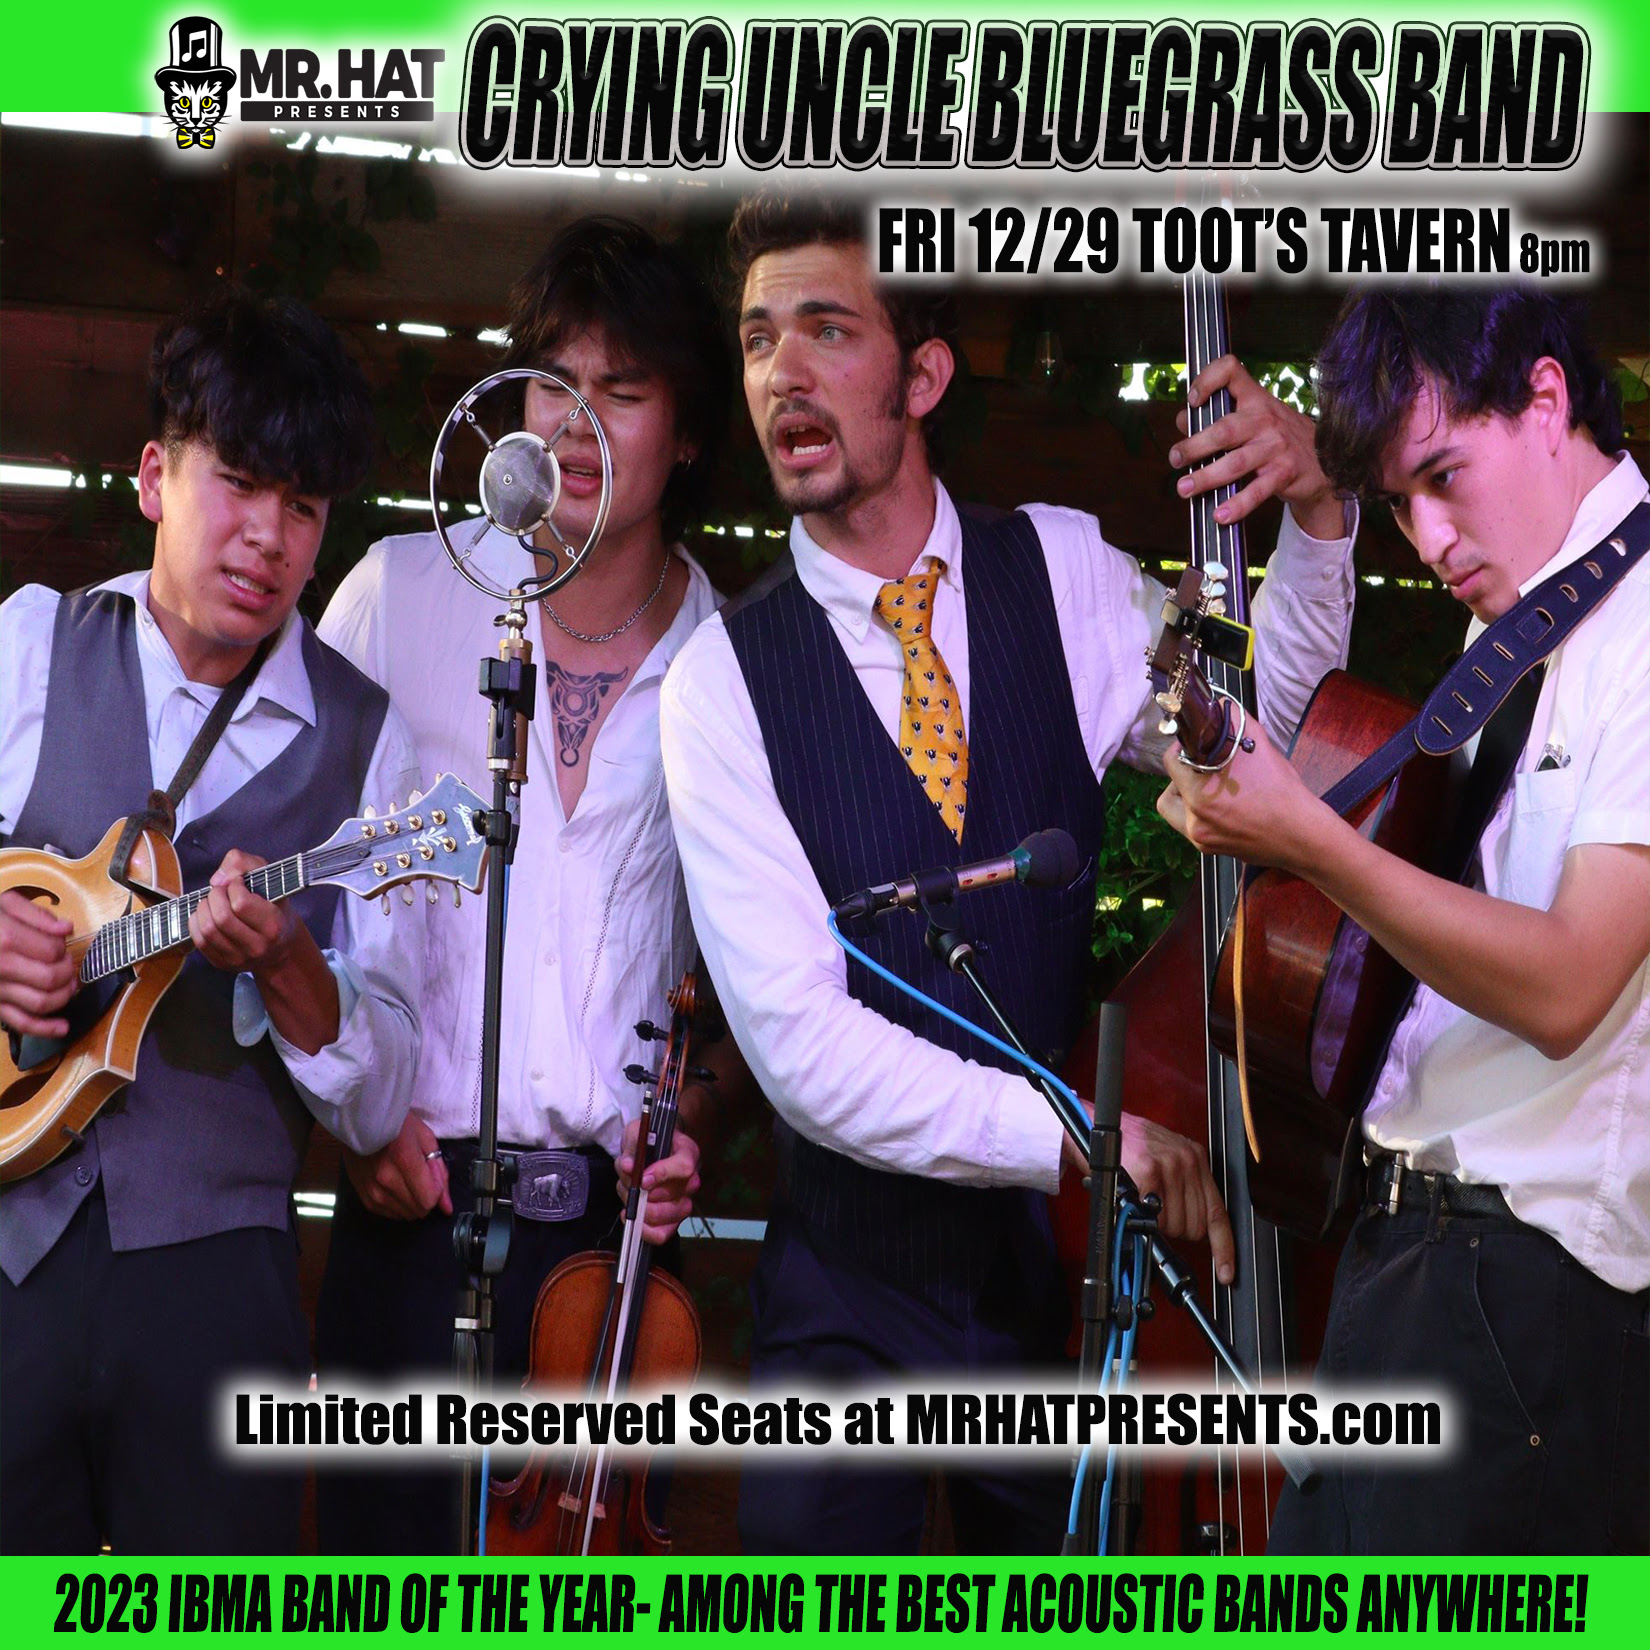 NEXT FRIDAY 12/29, AN EVENING WITH IBMA BAND OF THE YEAR- CRYING UNCLE BLUEGRASS BAND